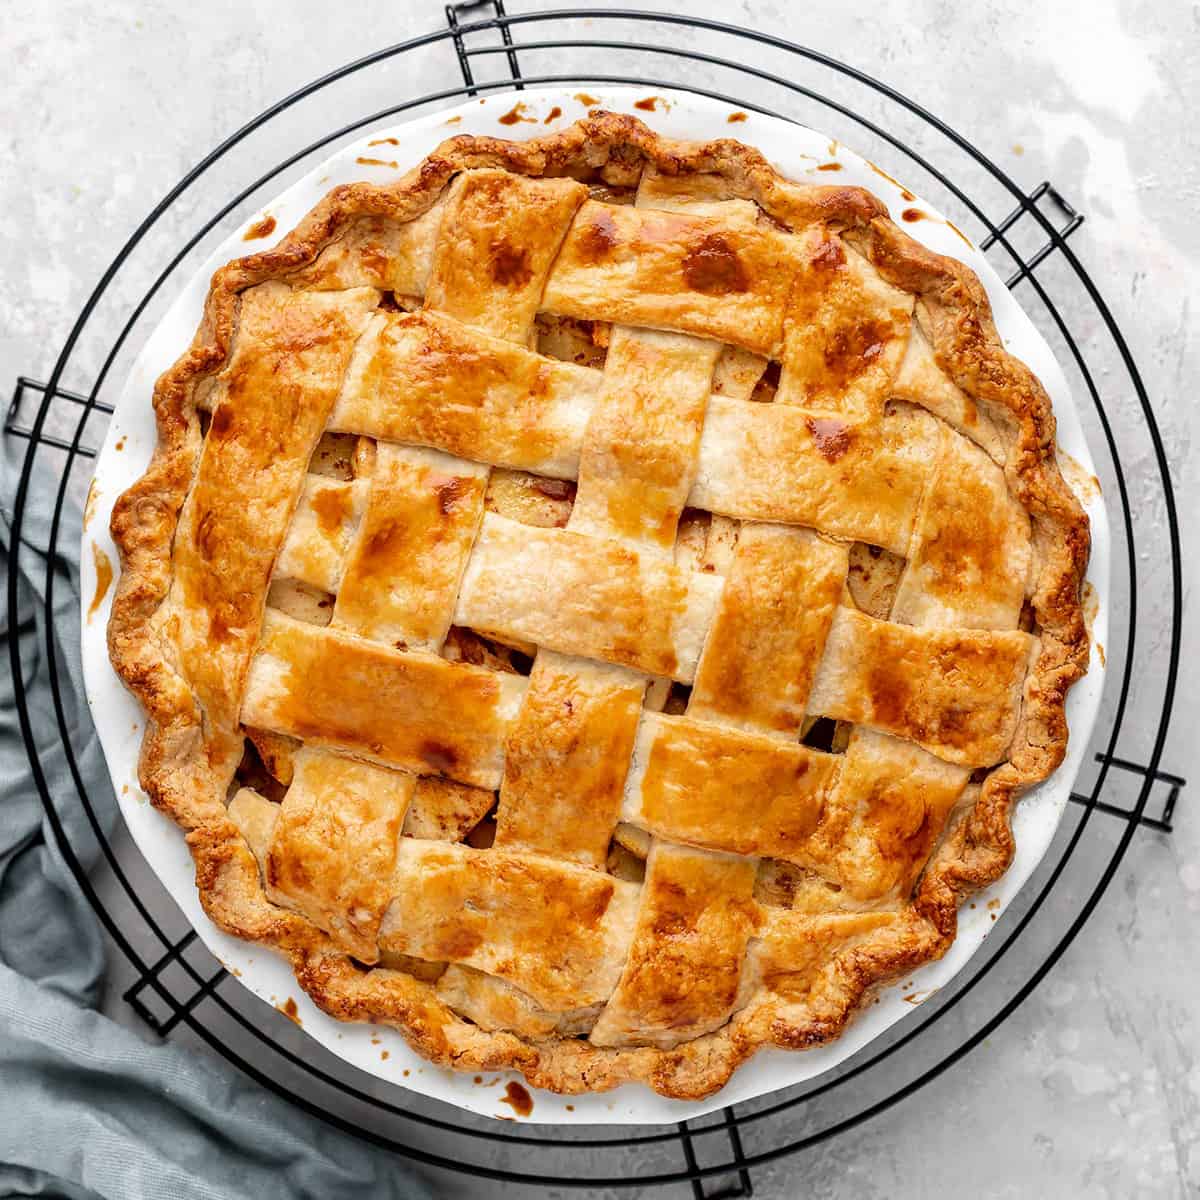 a baked Apple Pie on a wire cooling rack